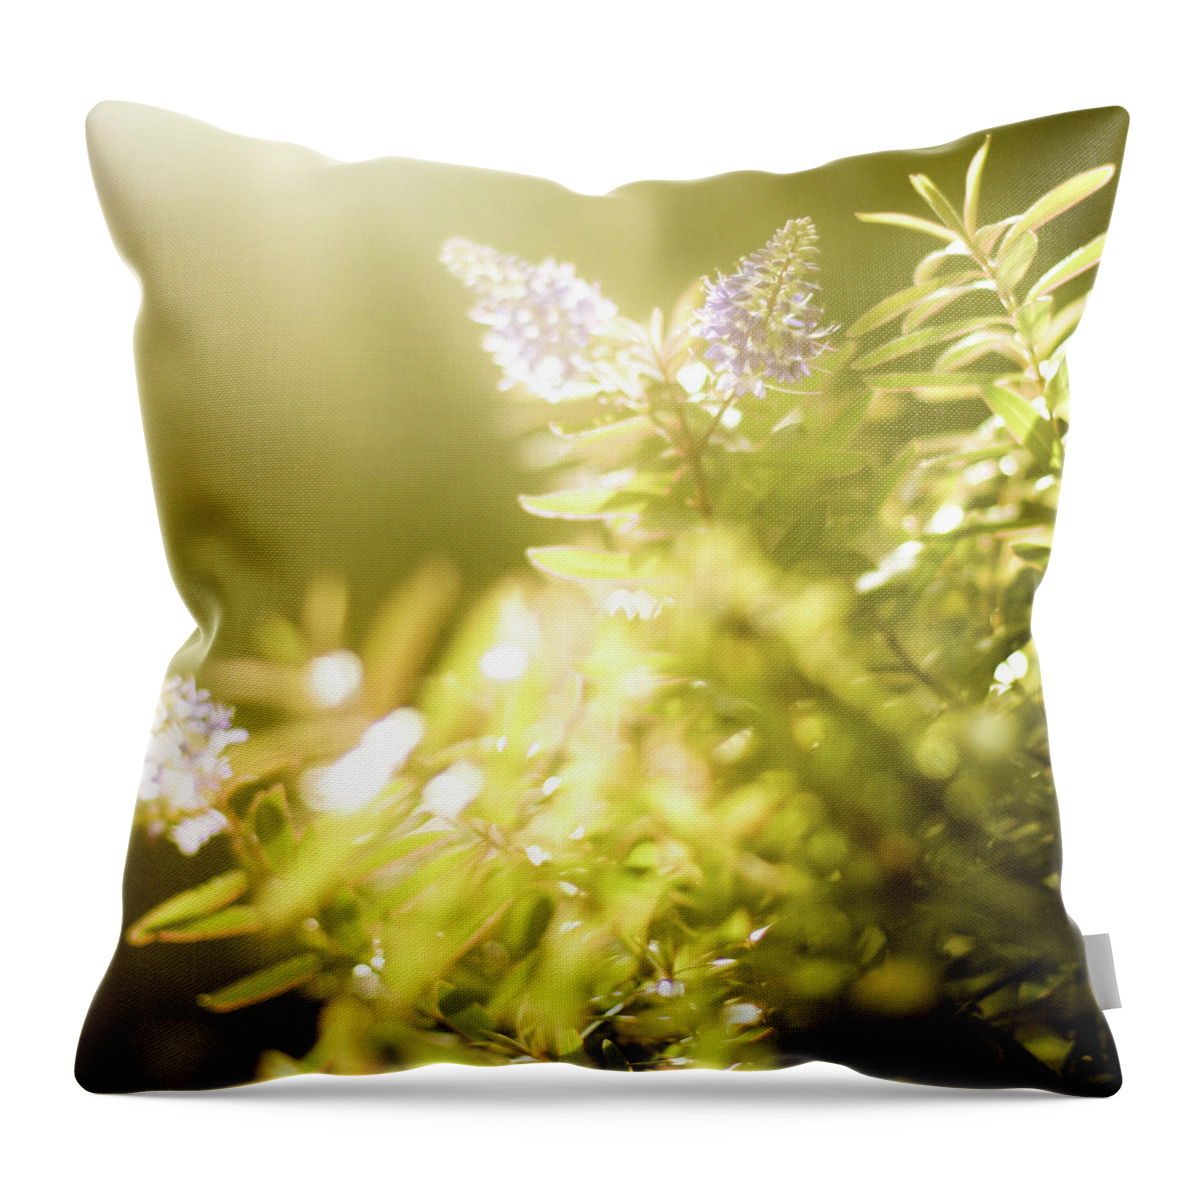 Purple Throw Pillow featuring the photograph Purple Flowers by (c) Harold Lloyd